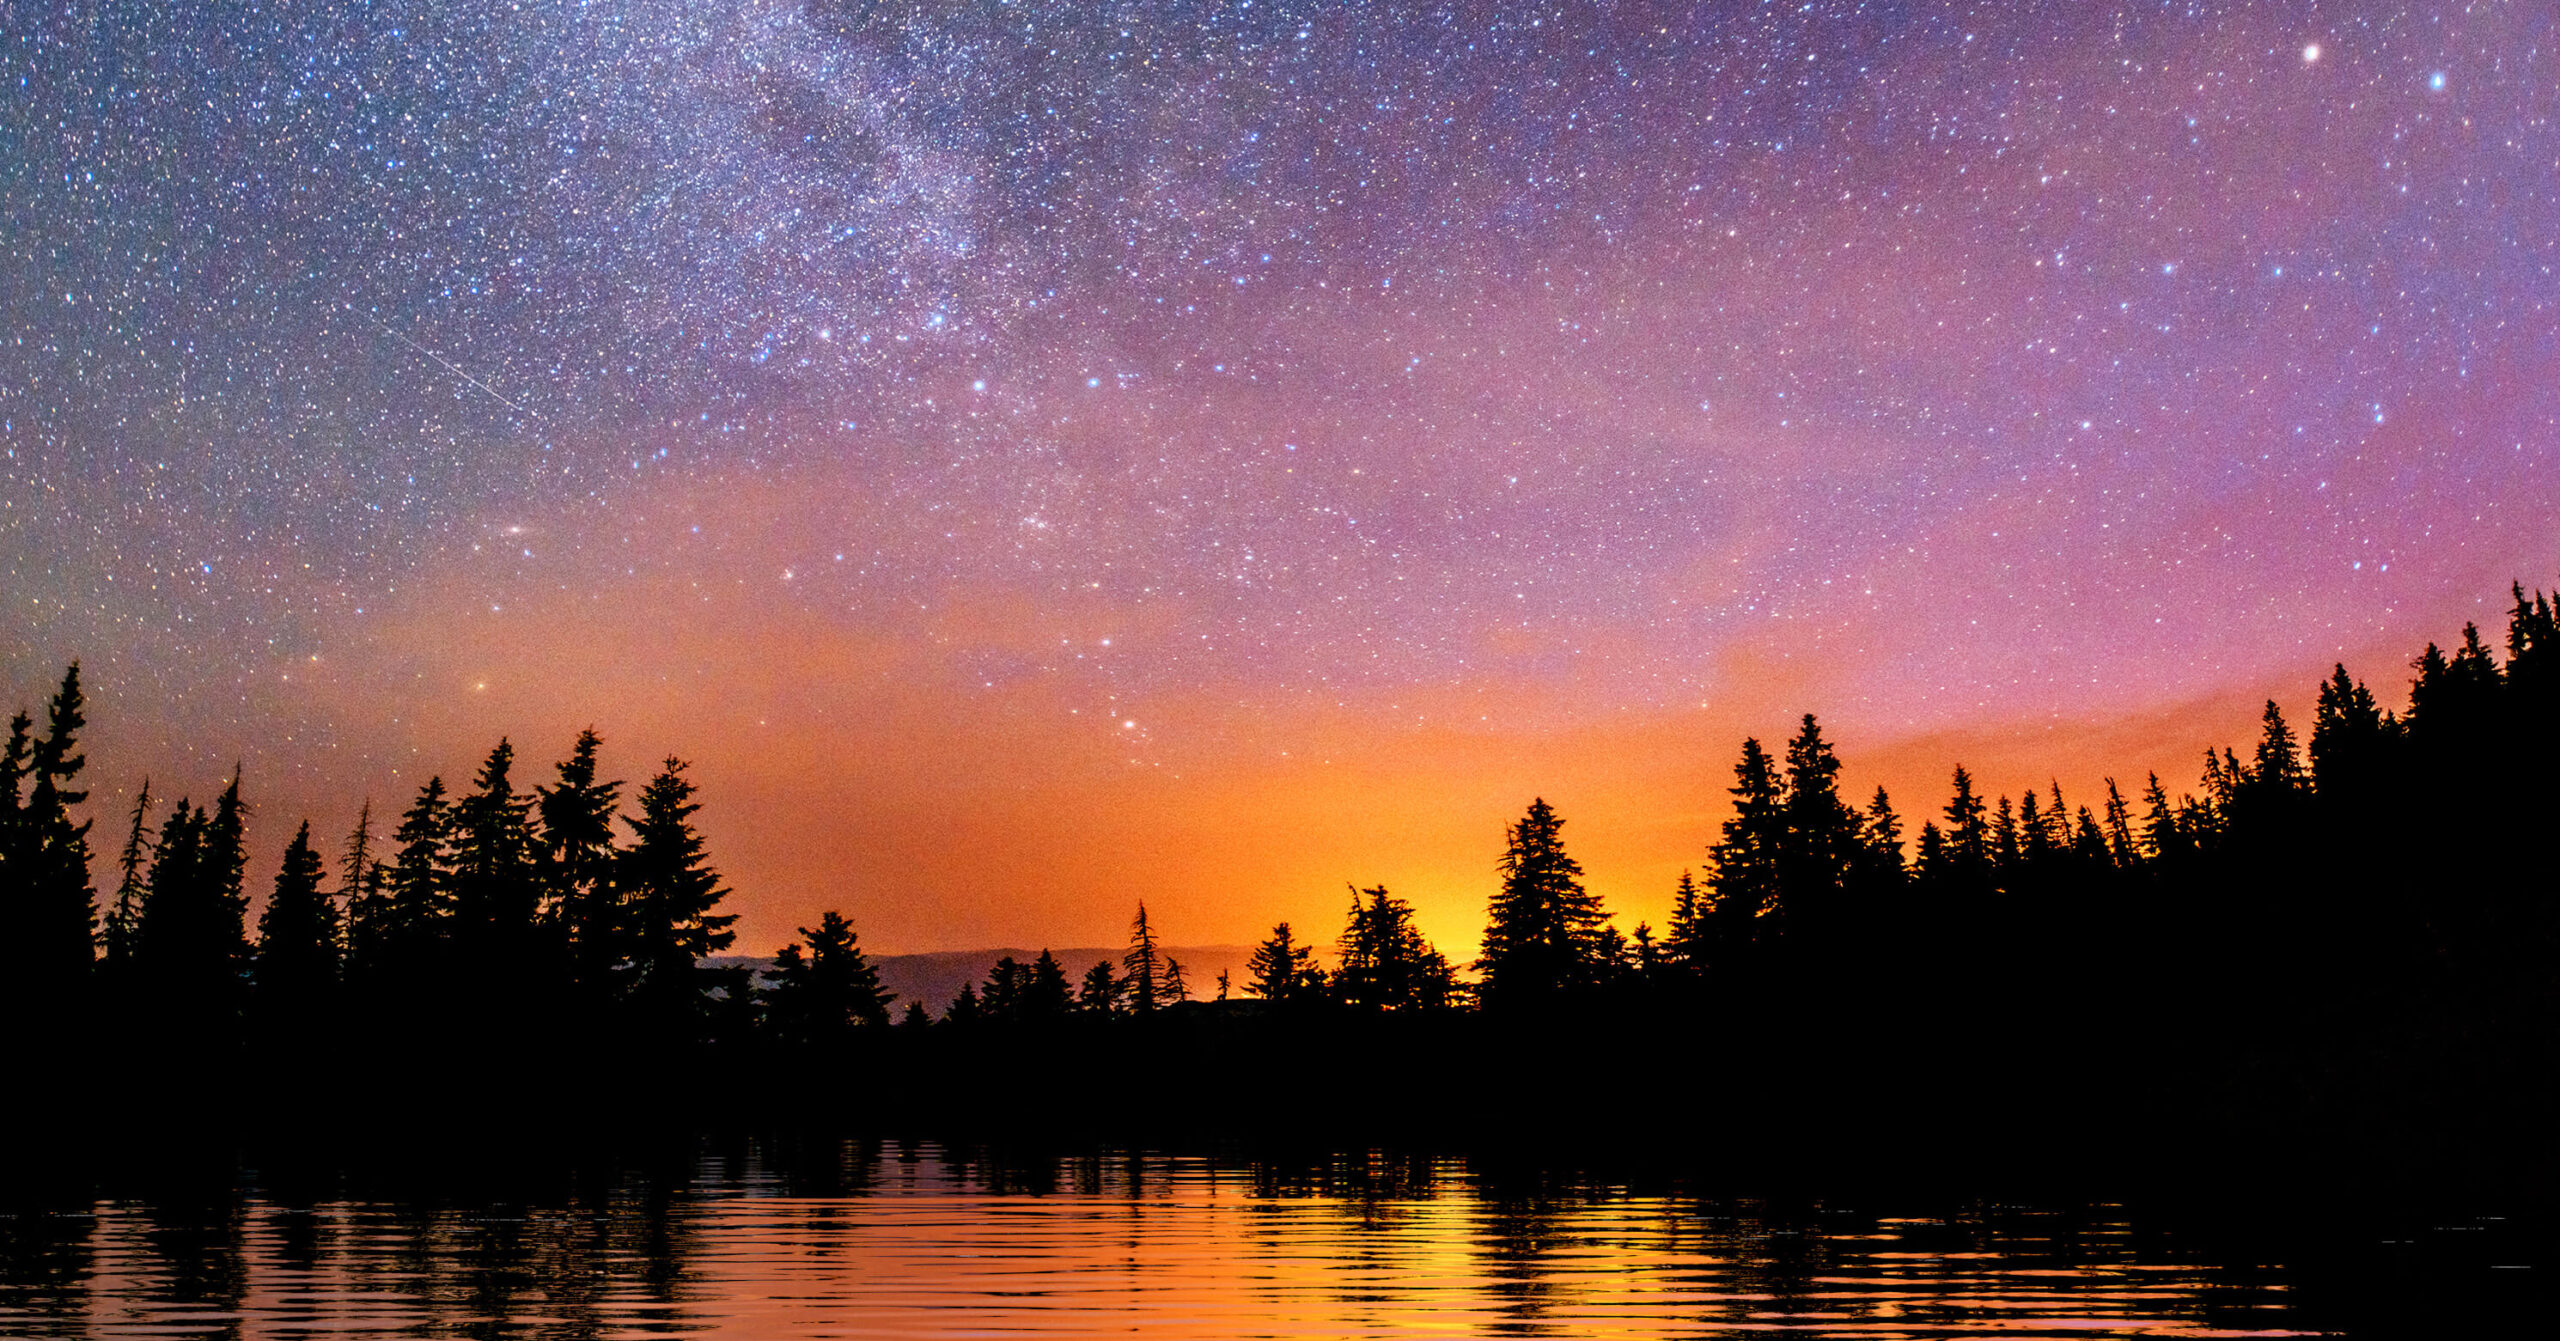 Meteor shower over sunset trees and water October 2022 featured